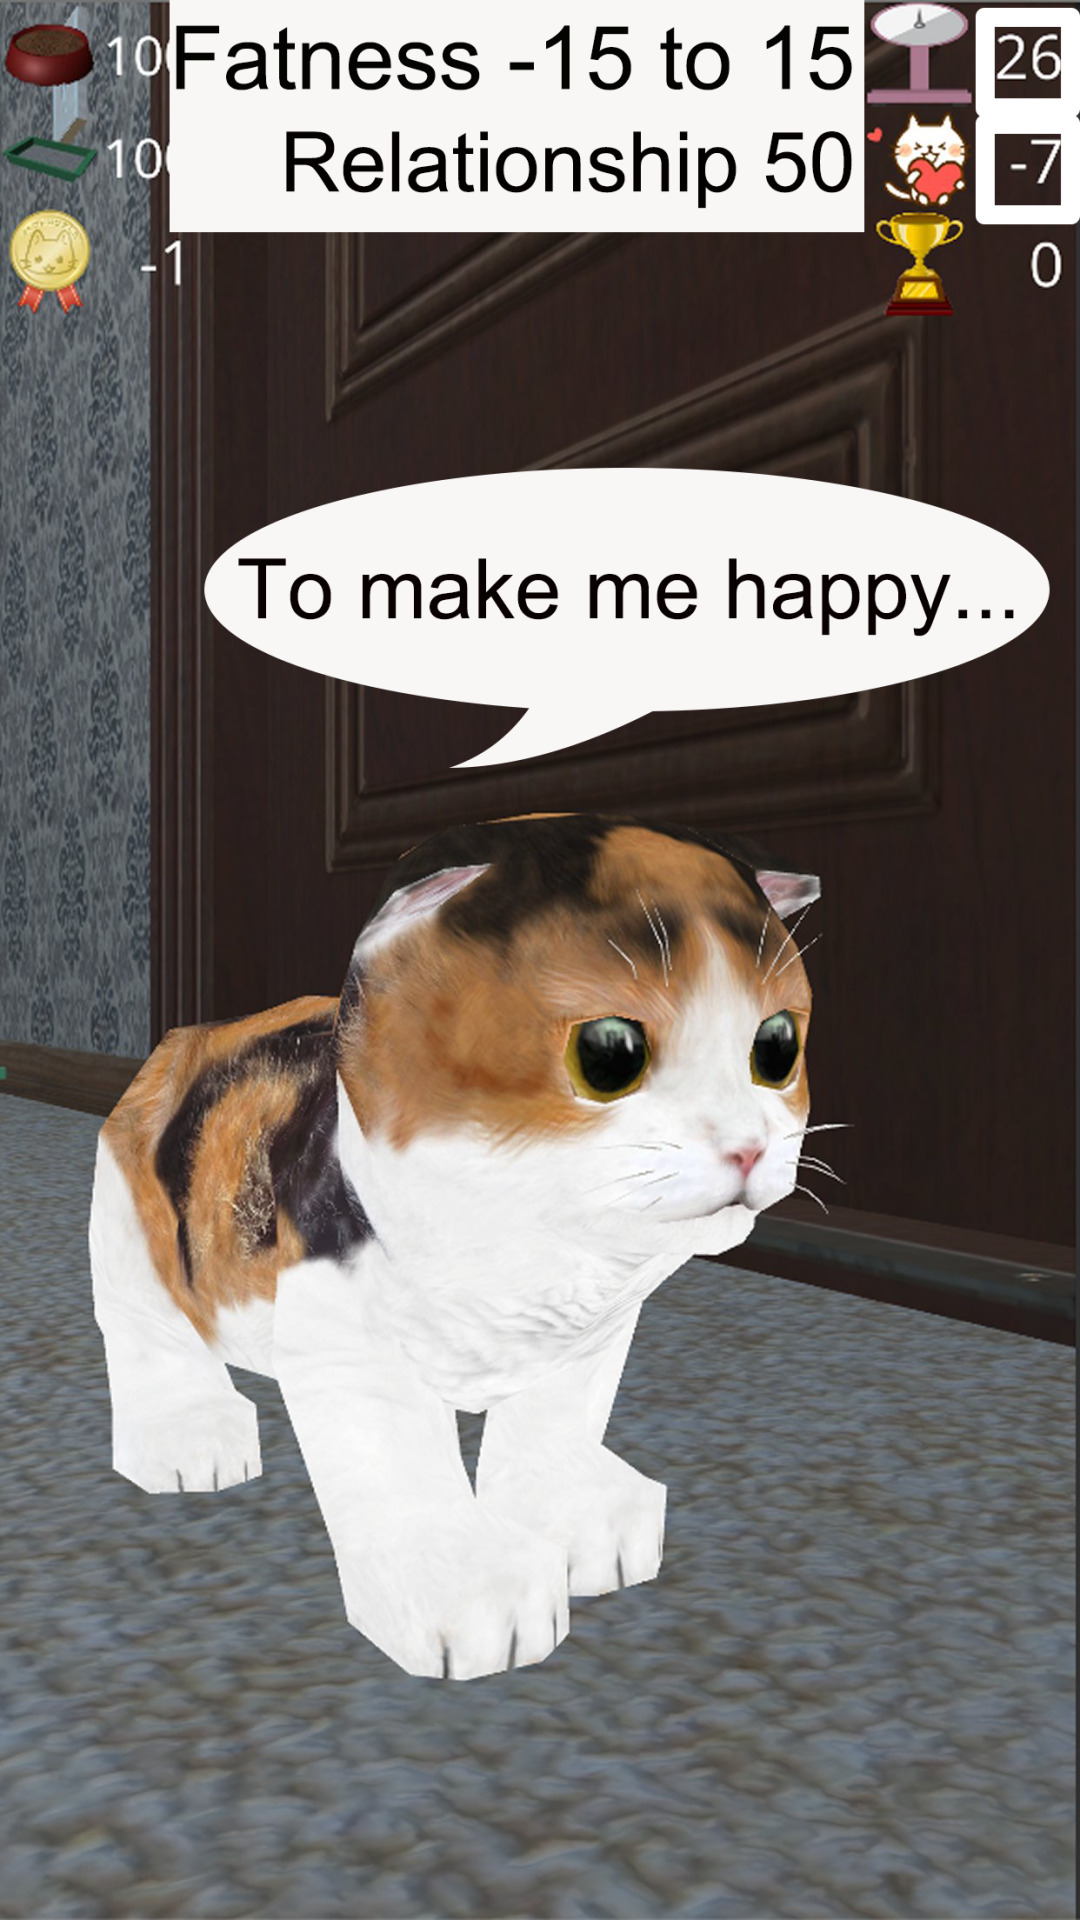 Talking Juan Cat Simulation for android download